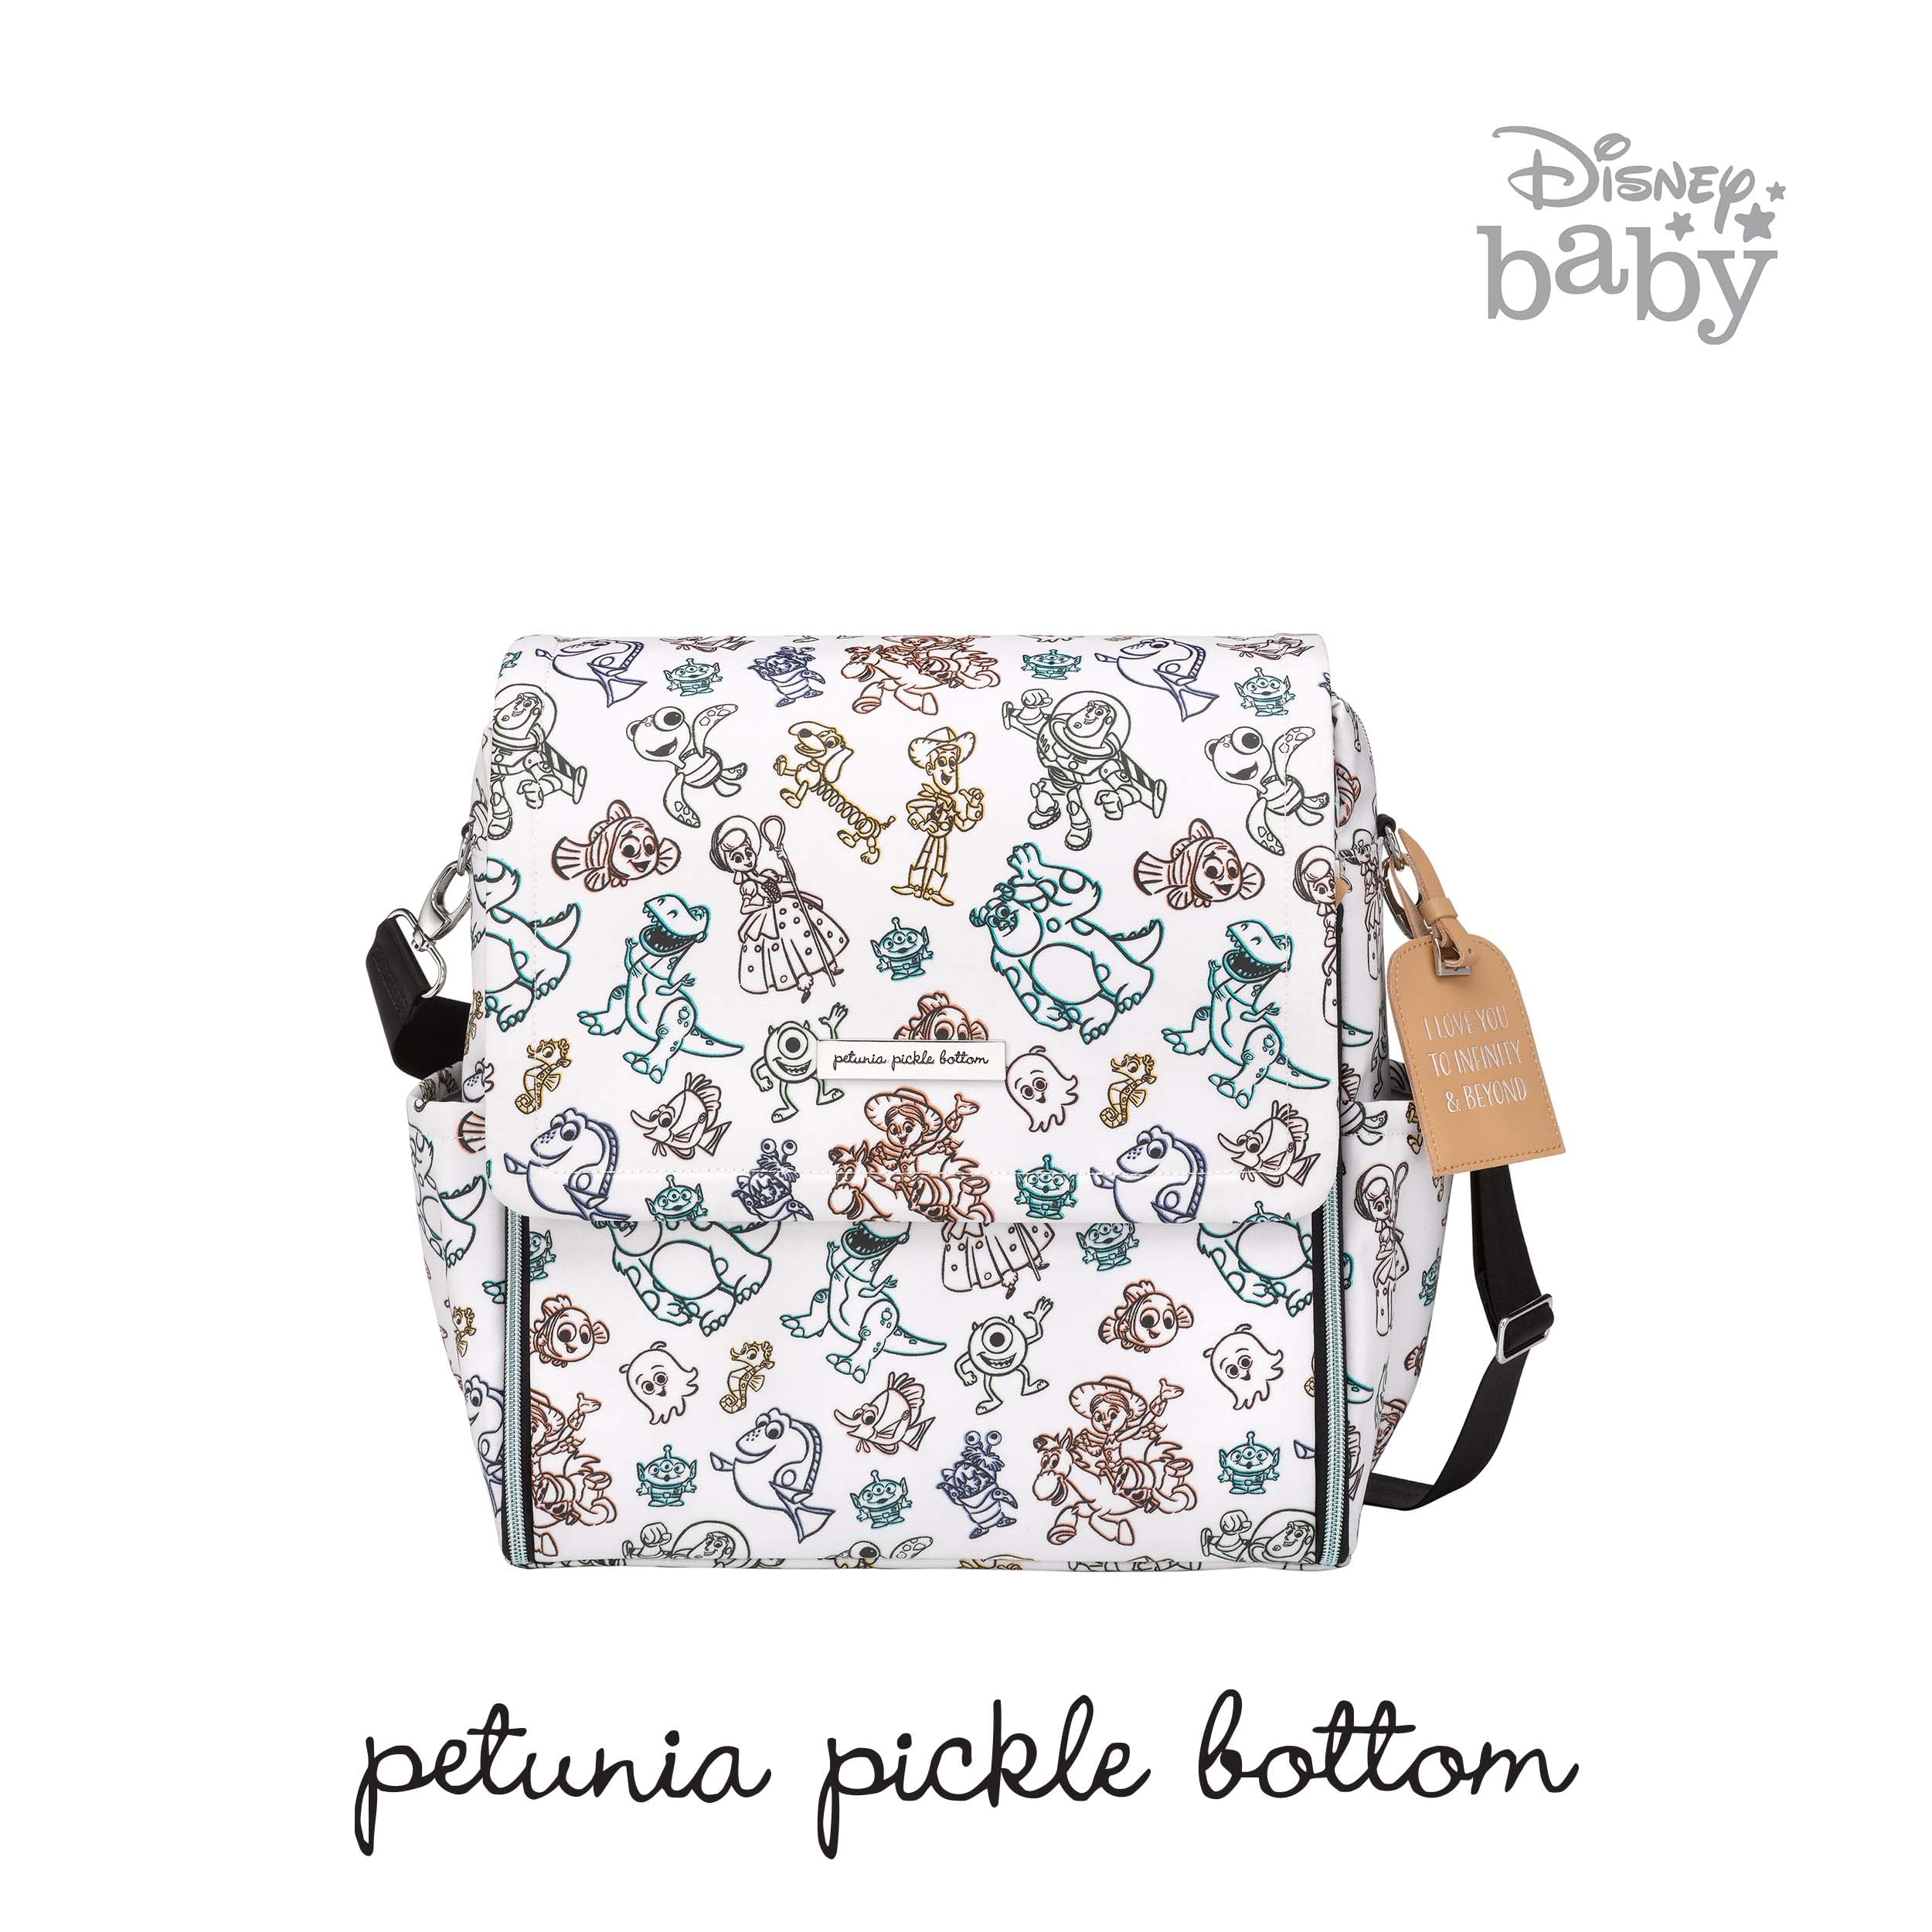 Petunia Pickle Bottom Boxy Backpack | Diaper Bag | Diaper Bag Backpack for Parents | Top-Selling Stylish Baby Bag | Spacious Backpack for On The Go Moms | Disney & Pixar Playday